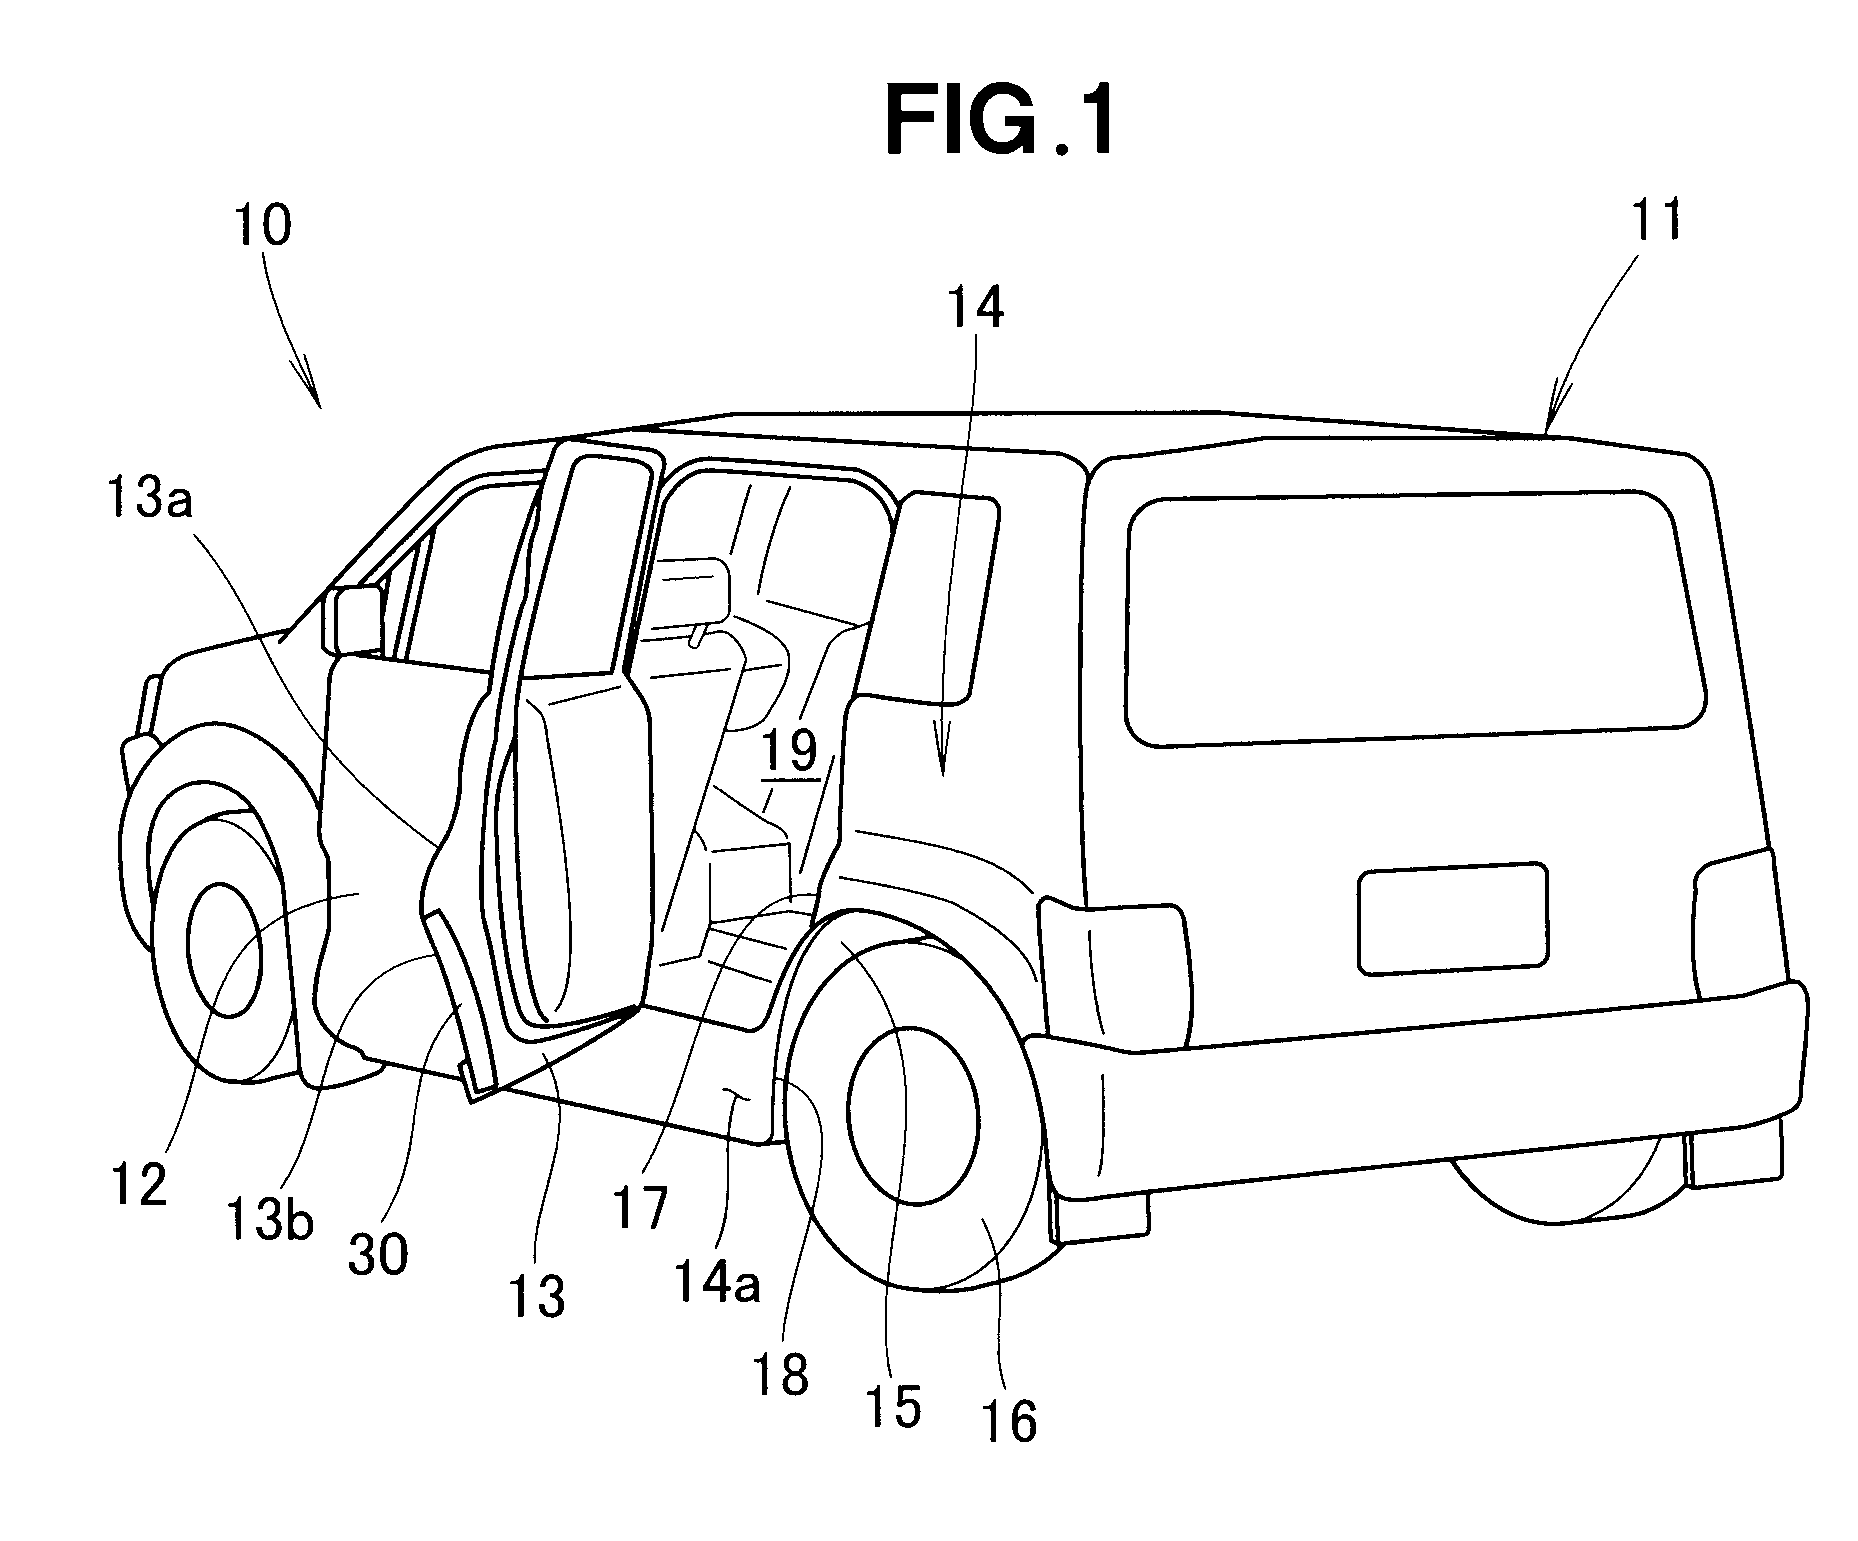 Wheel-arch protector for vehicle